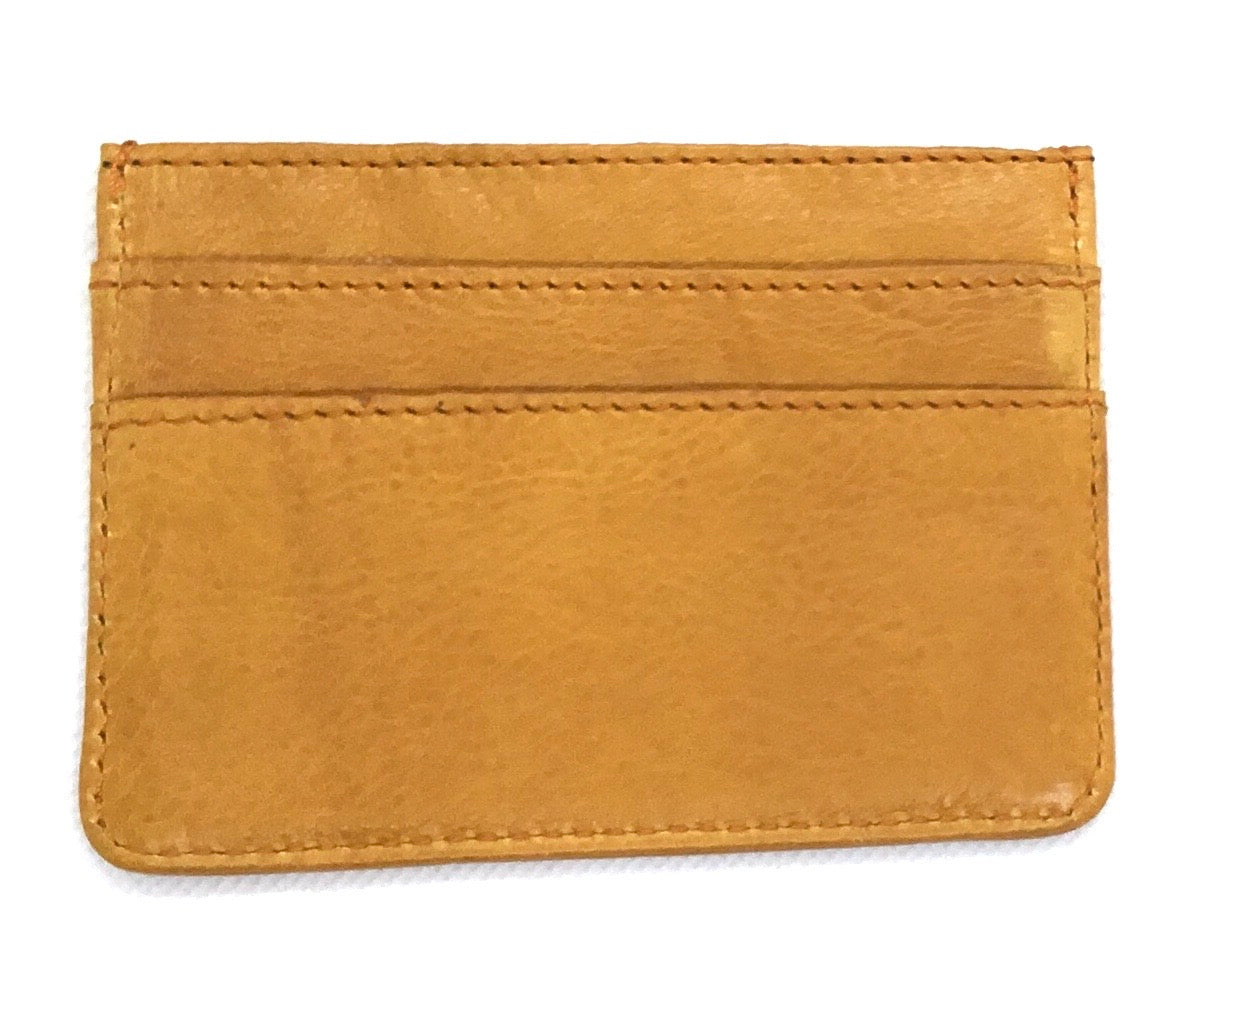 Cooper Allan Slime Credit Card Case in full grain  leather with 4 card slots and a section for notes in the middle.